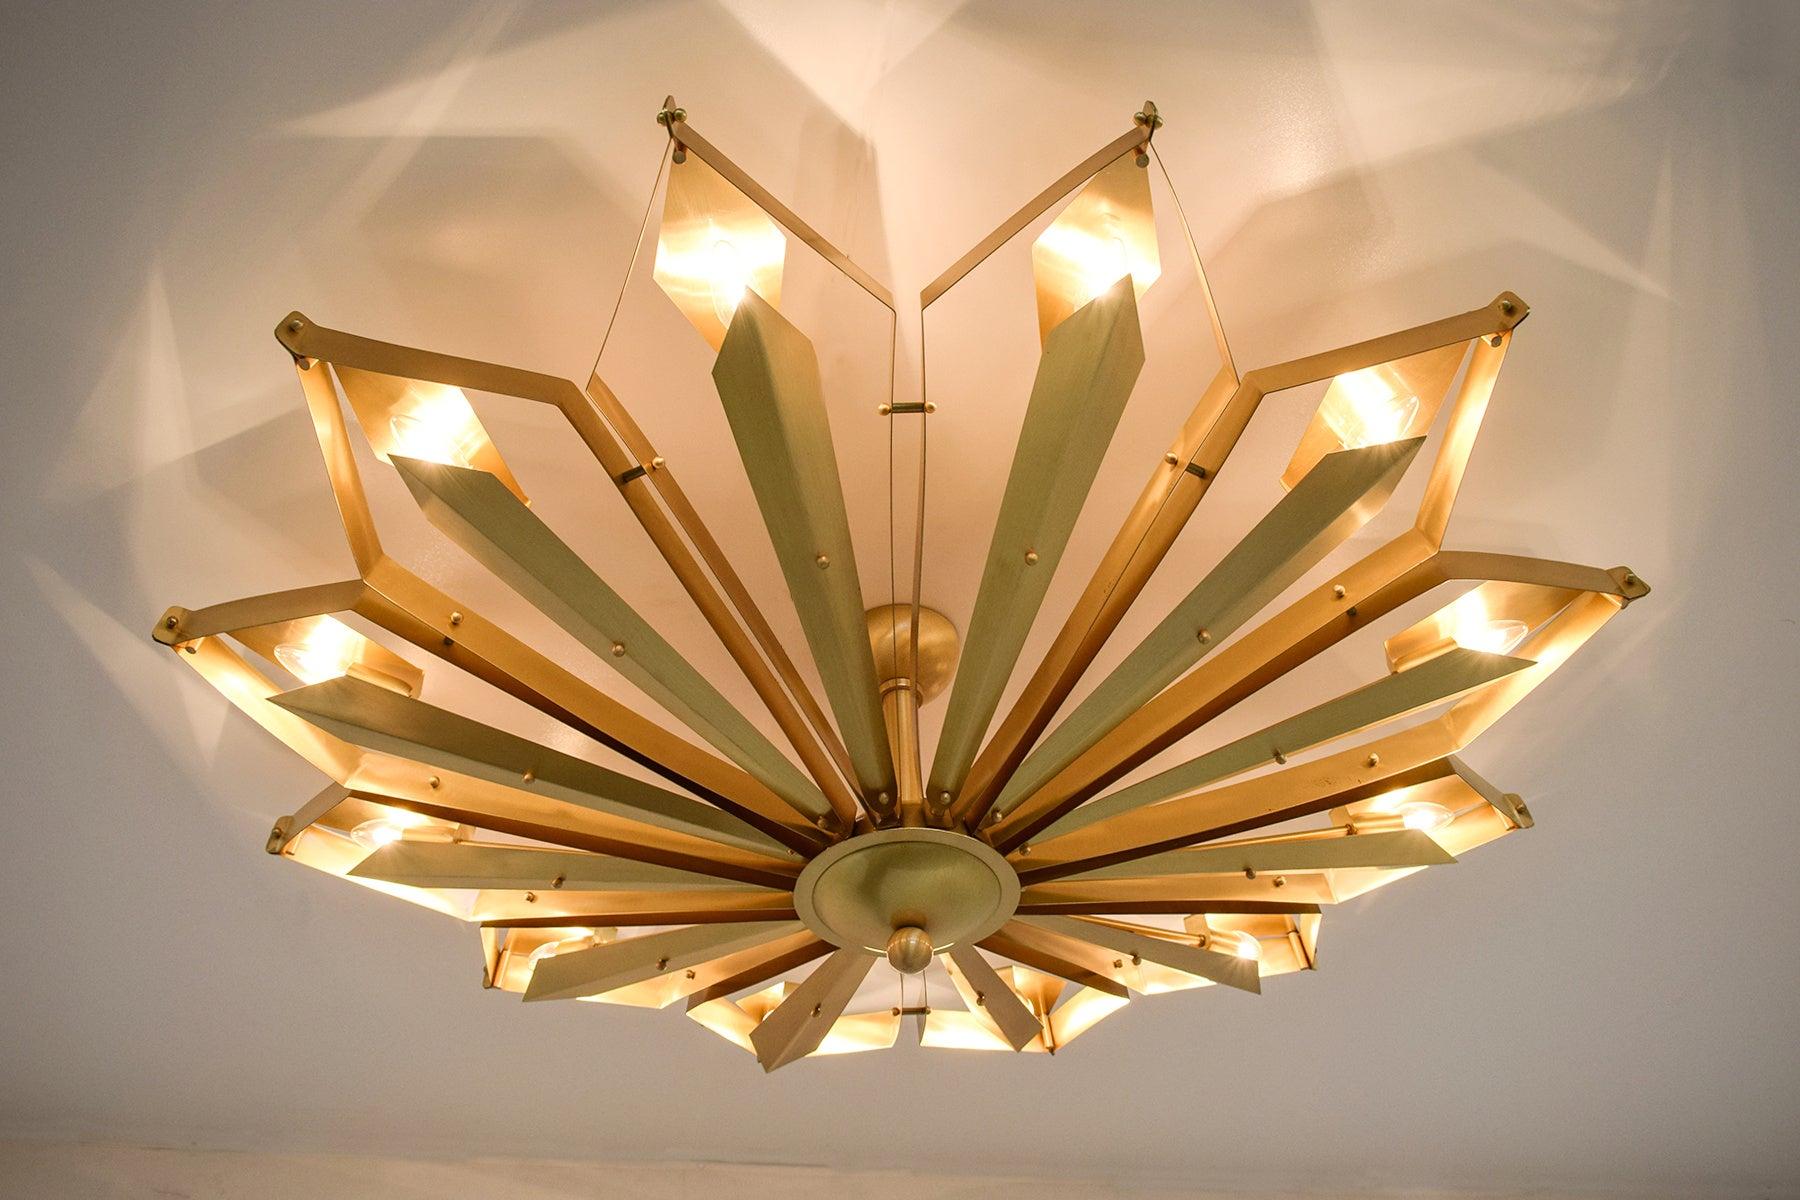 Elegant Italian flushmount with satin brass frame handcrafted to resemble a convex dahlia flower, designed by Fabio Bergomi for Fabio Ltd, made in Italy
12 lights / E12 or E14 type / max 40W each
Measures: Diameter 51 inches, height 16 inches
Order